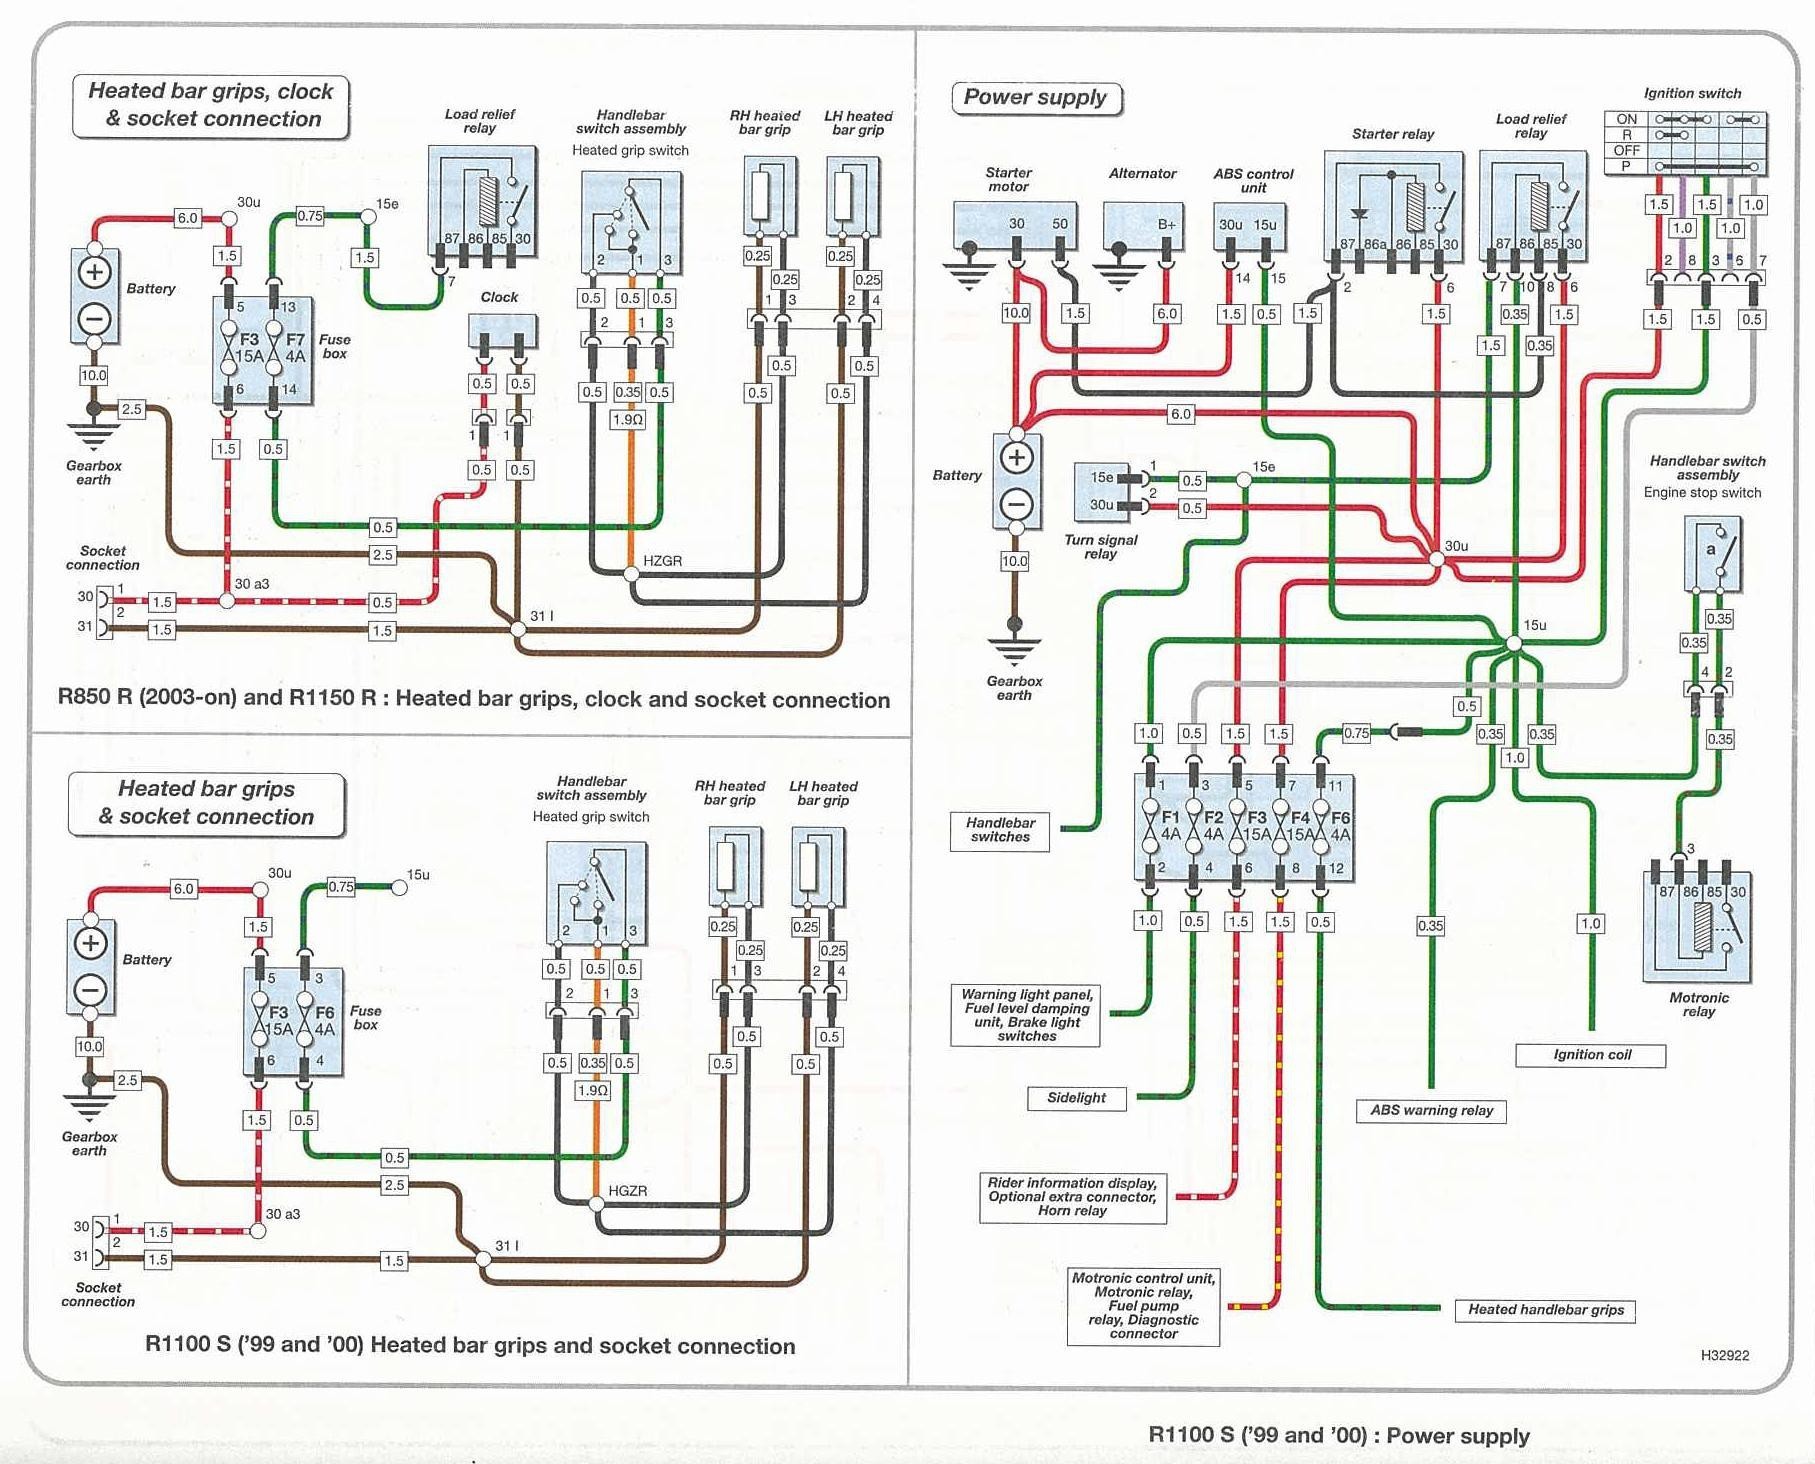 Engine Compartment Diagram 2004 Bmw 330ci Engine Diagram Another Blog About Wiring Diagram • Of Engine Compartment Diagram